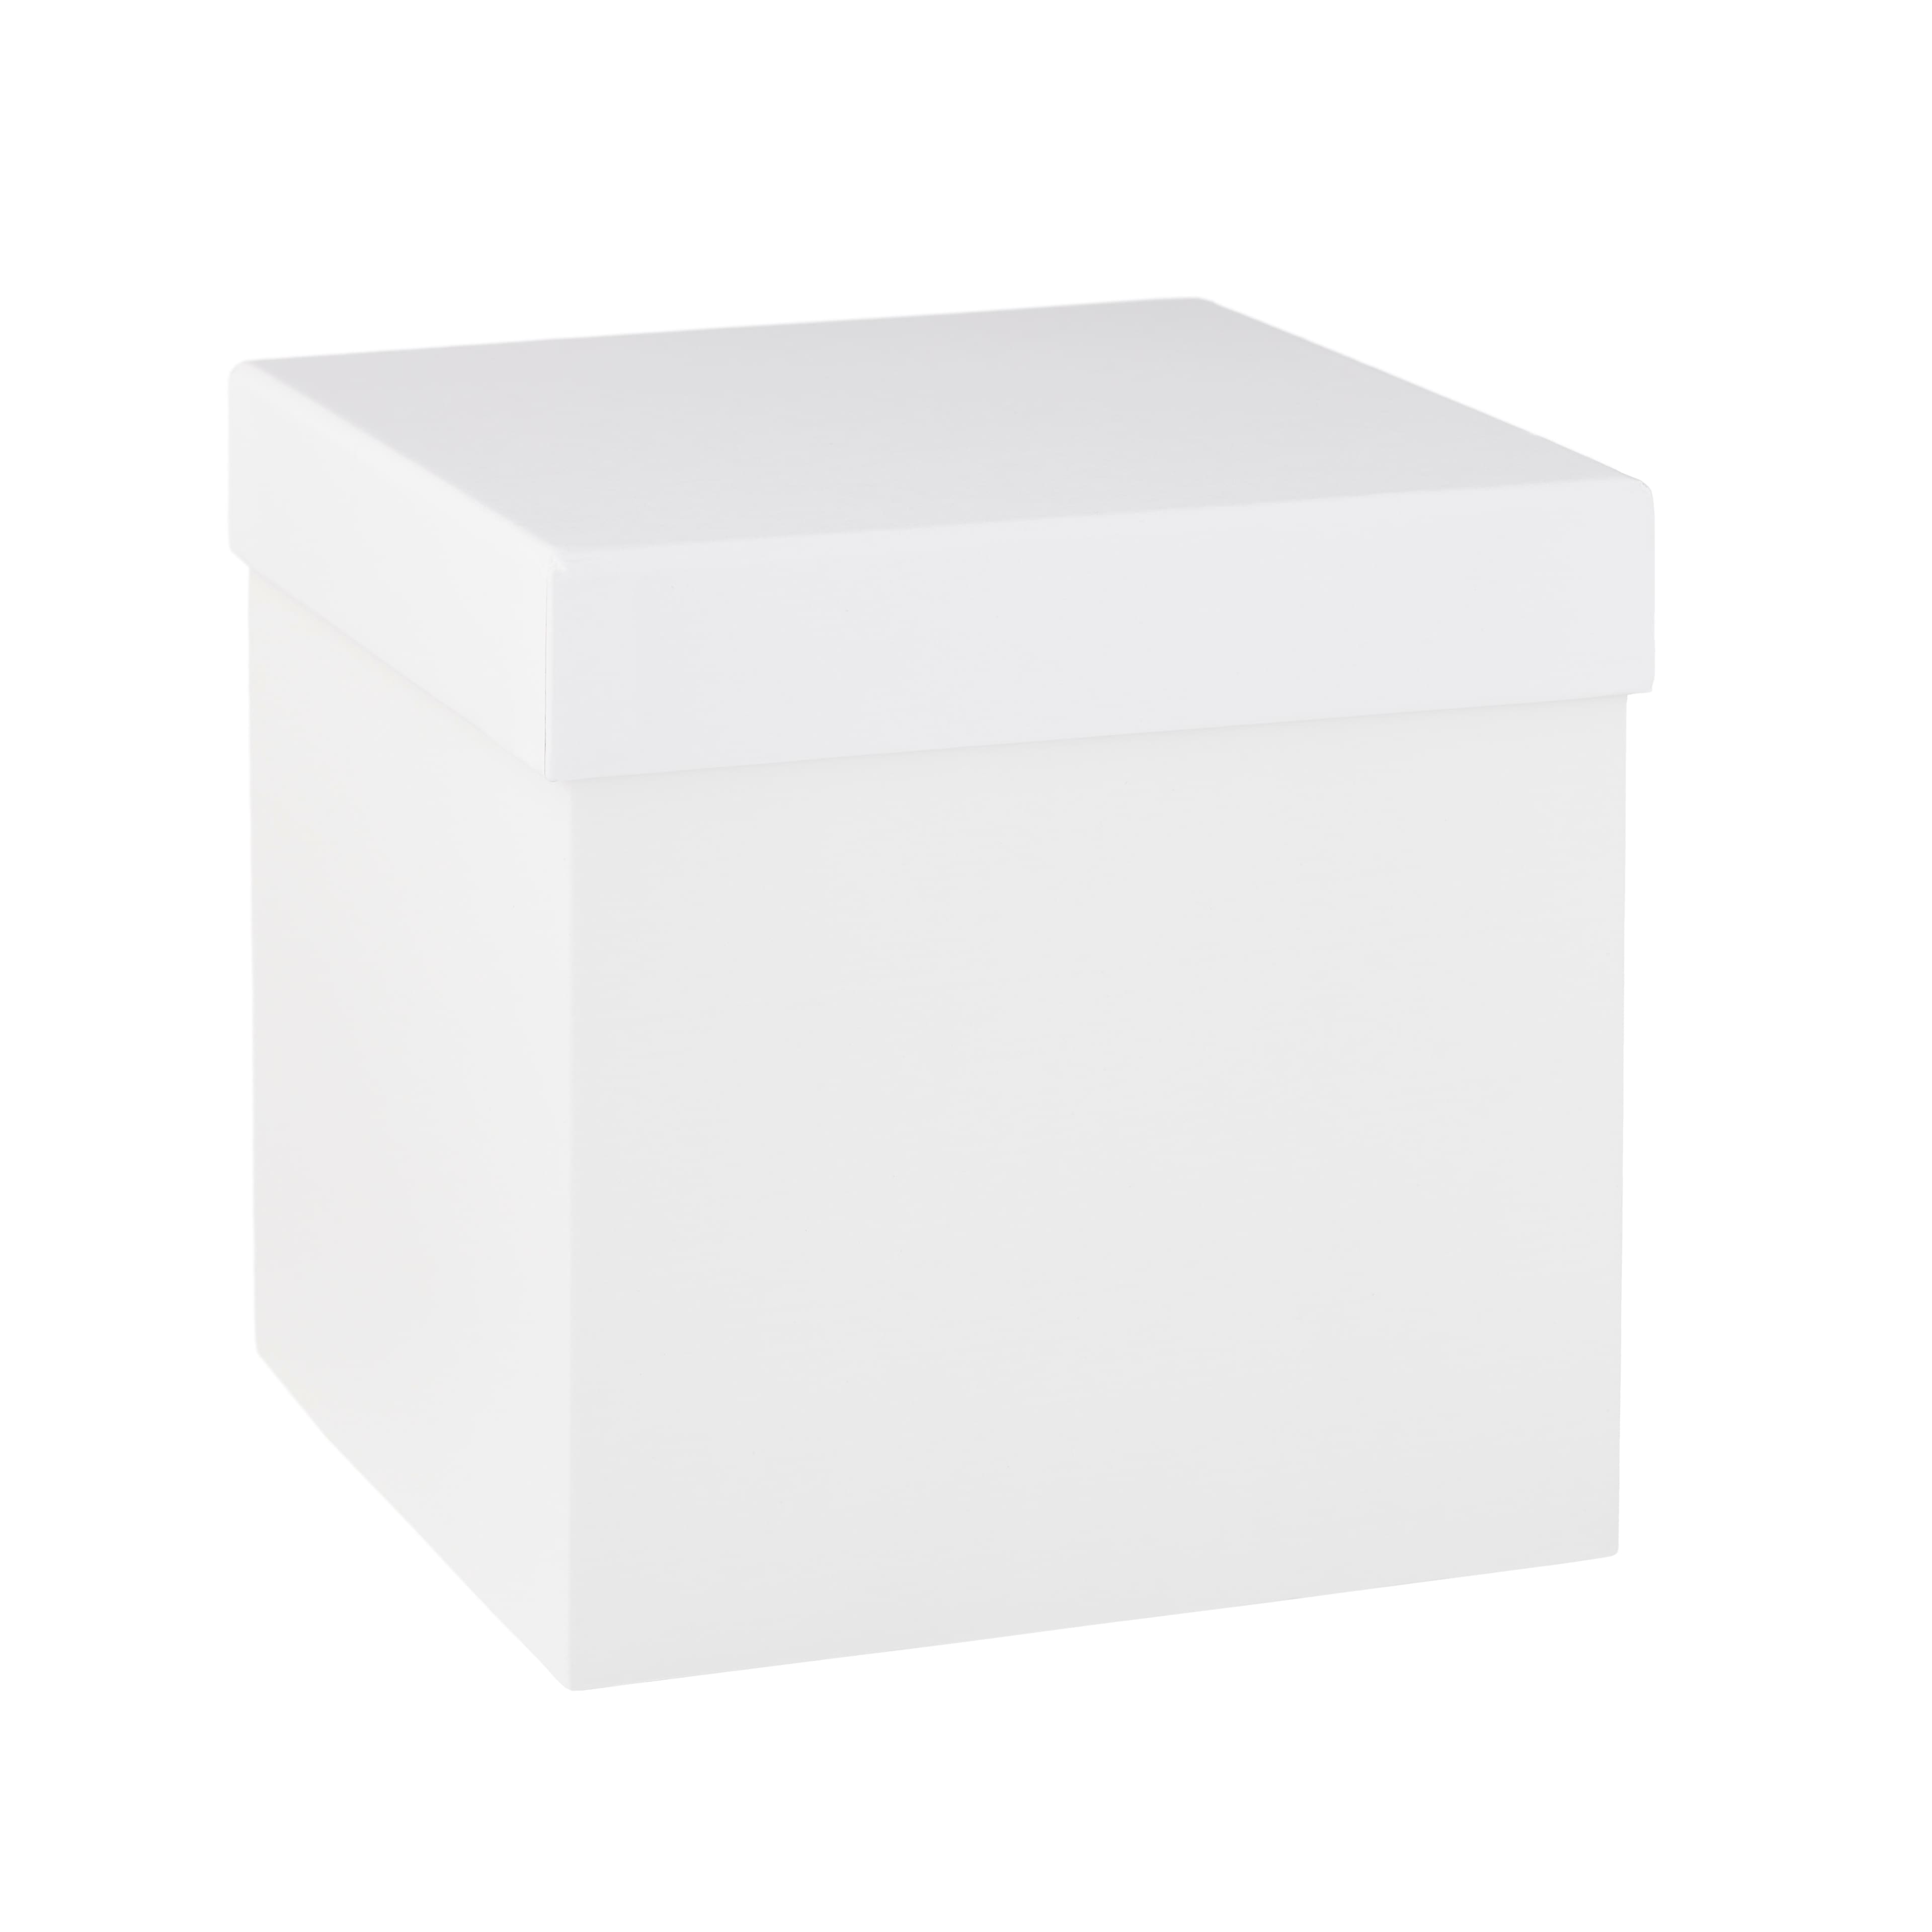  Set of 4 Round Nesting Gift Boxes with Lids, Small